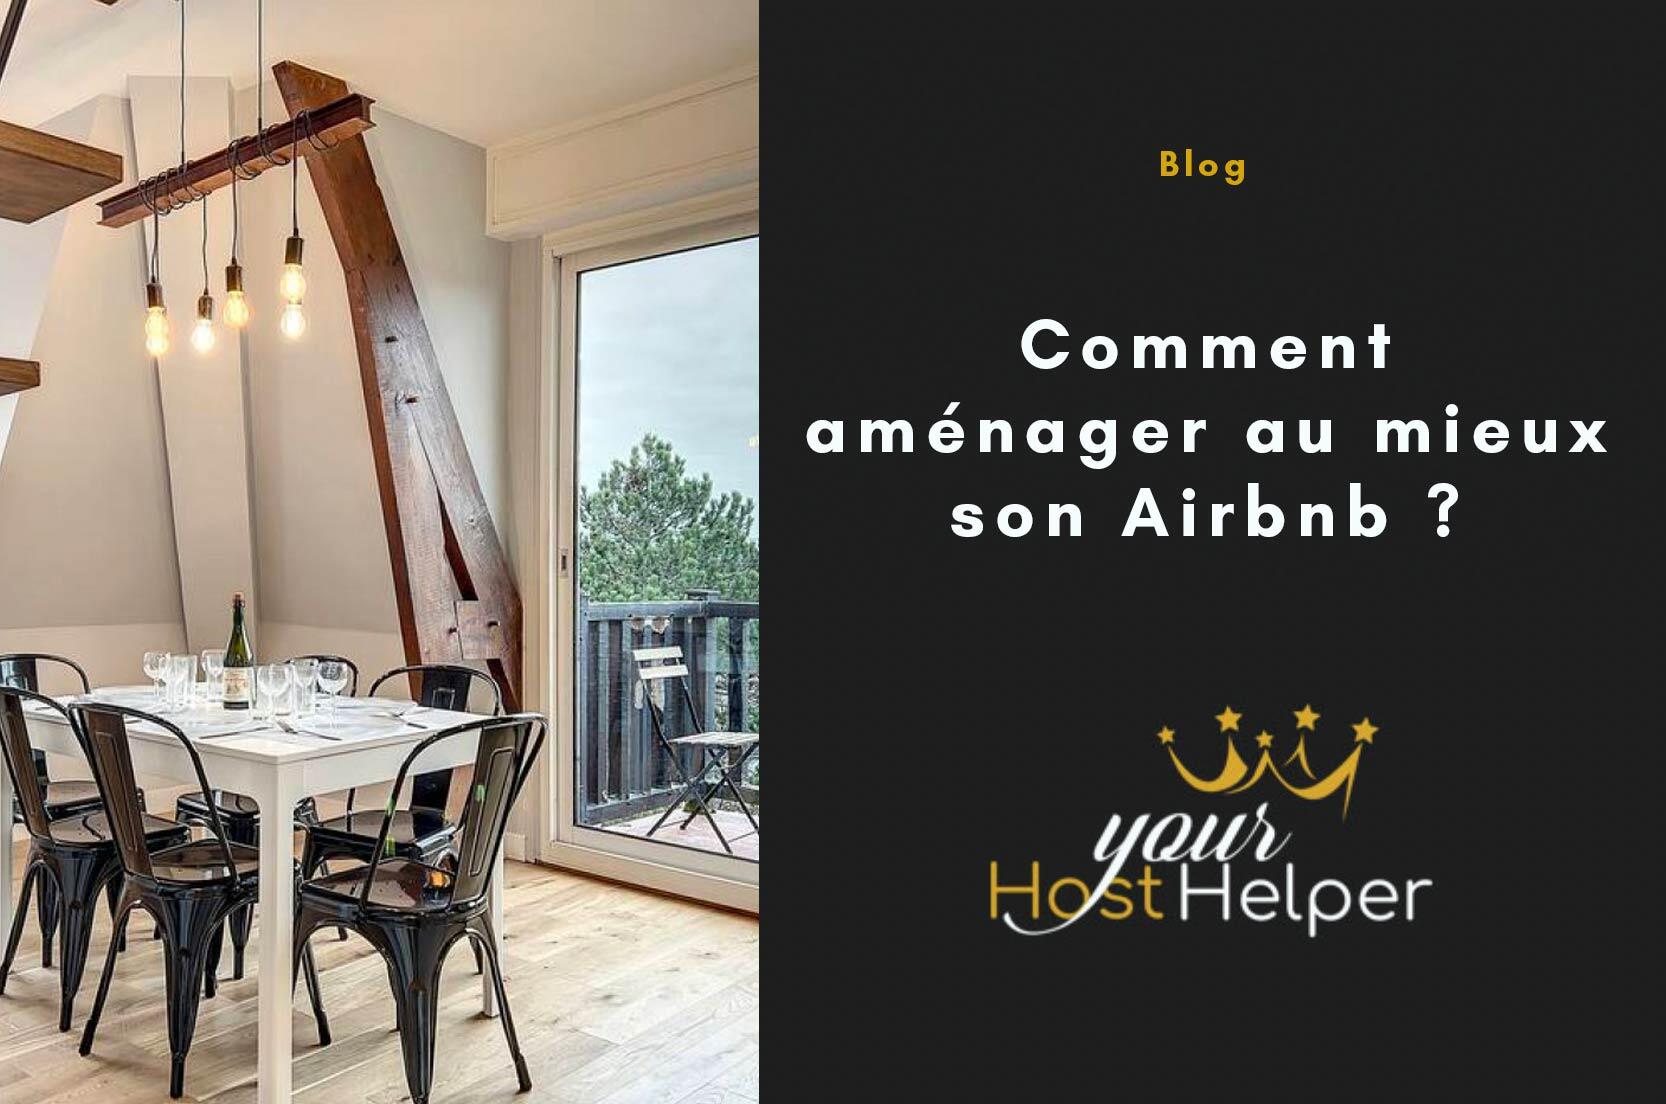 You are currently viewing Comment aménager au mieux son Airbnb ?